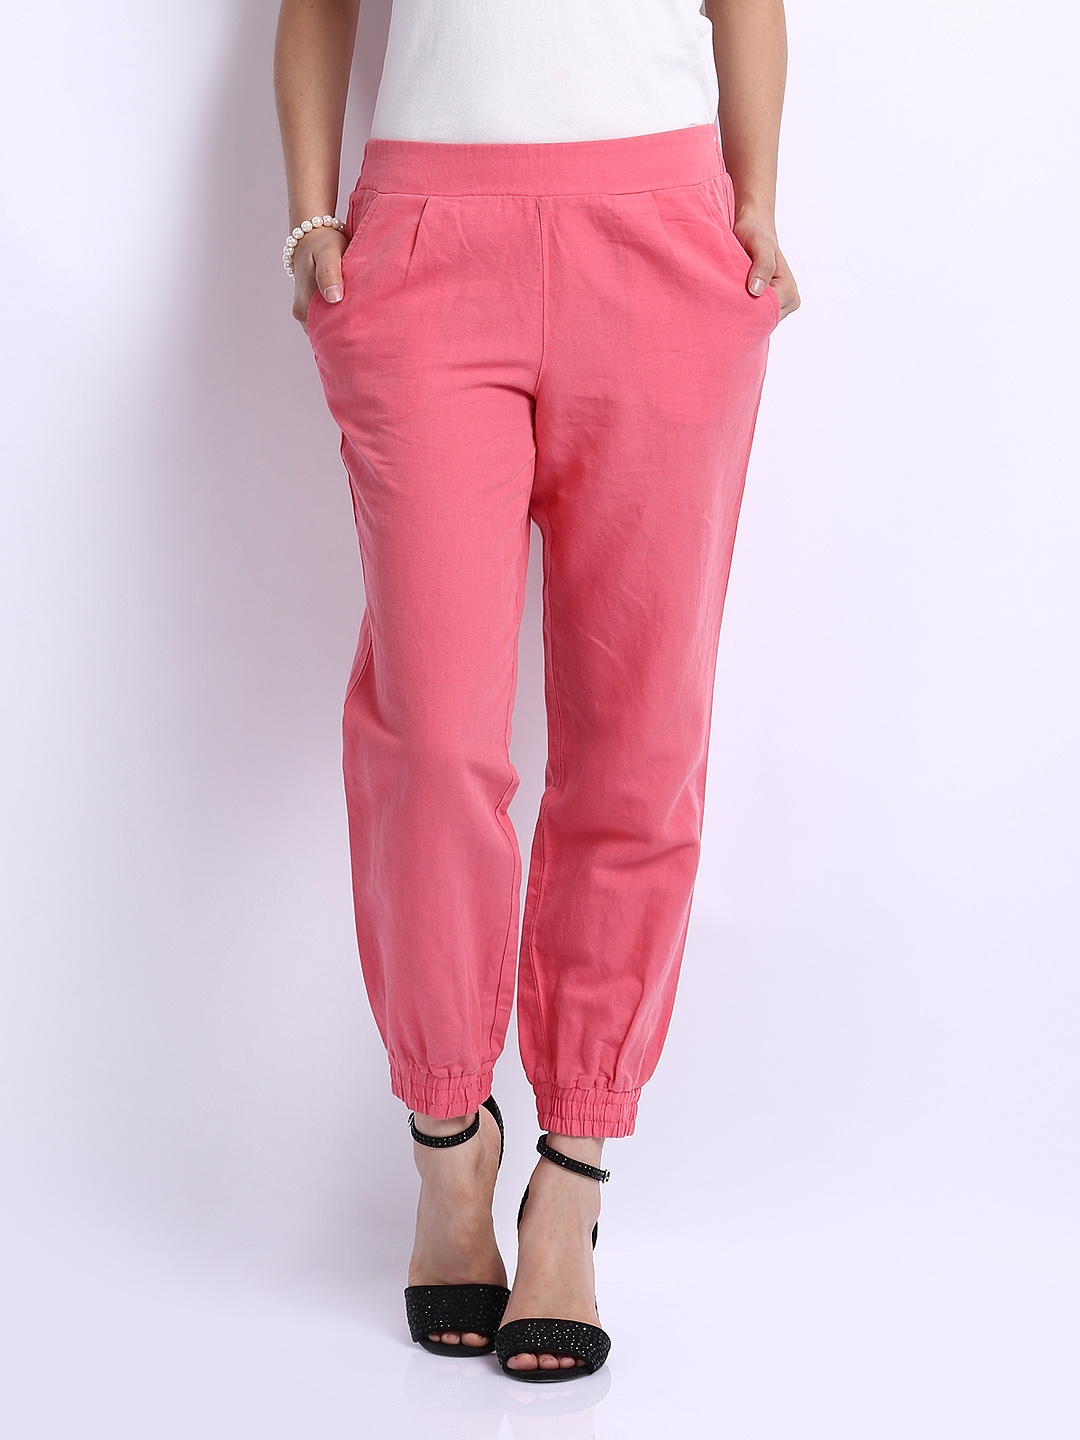 Buy United Colors Of Benetton Women Pink Linen Blend Trousers - Trousers for Women 255514 | Myntra